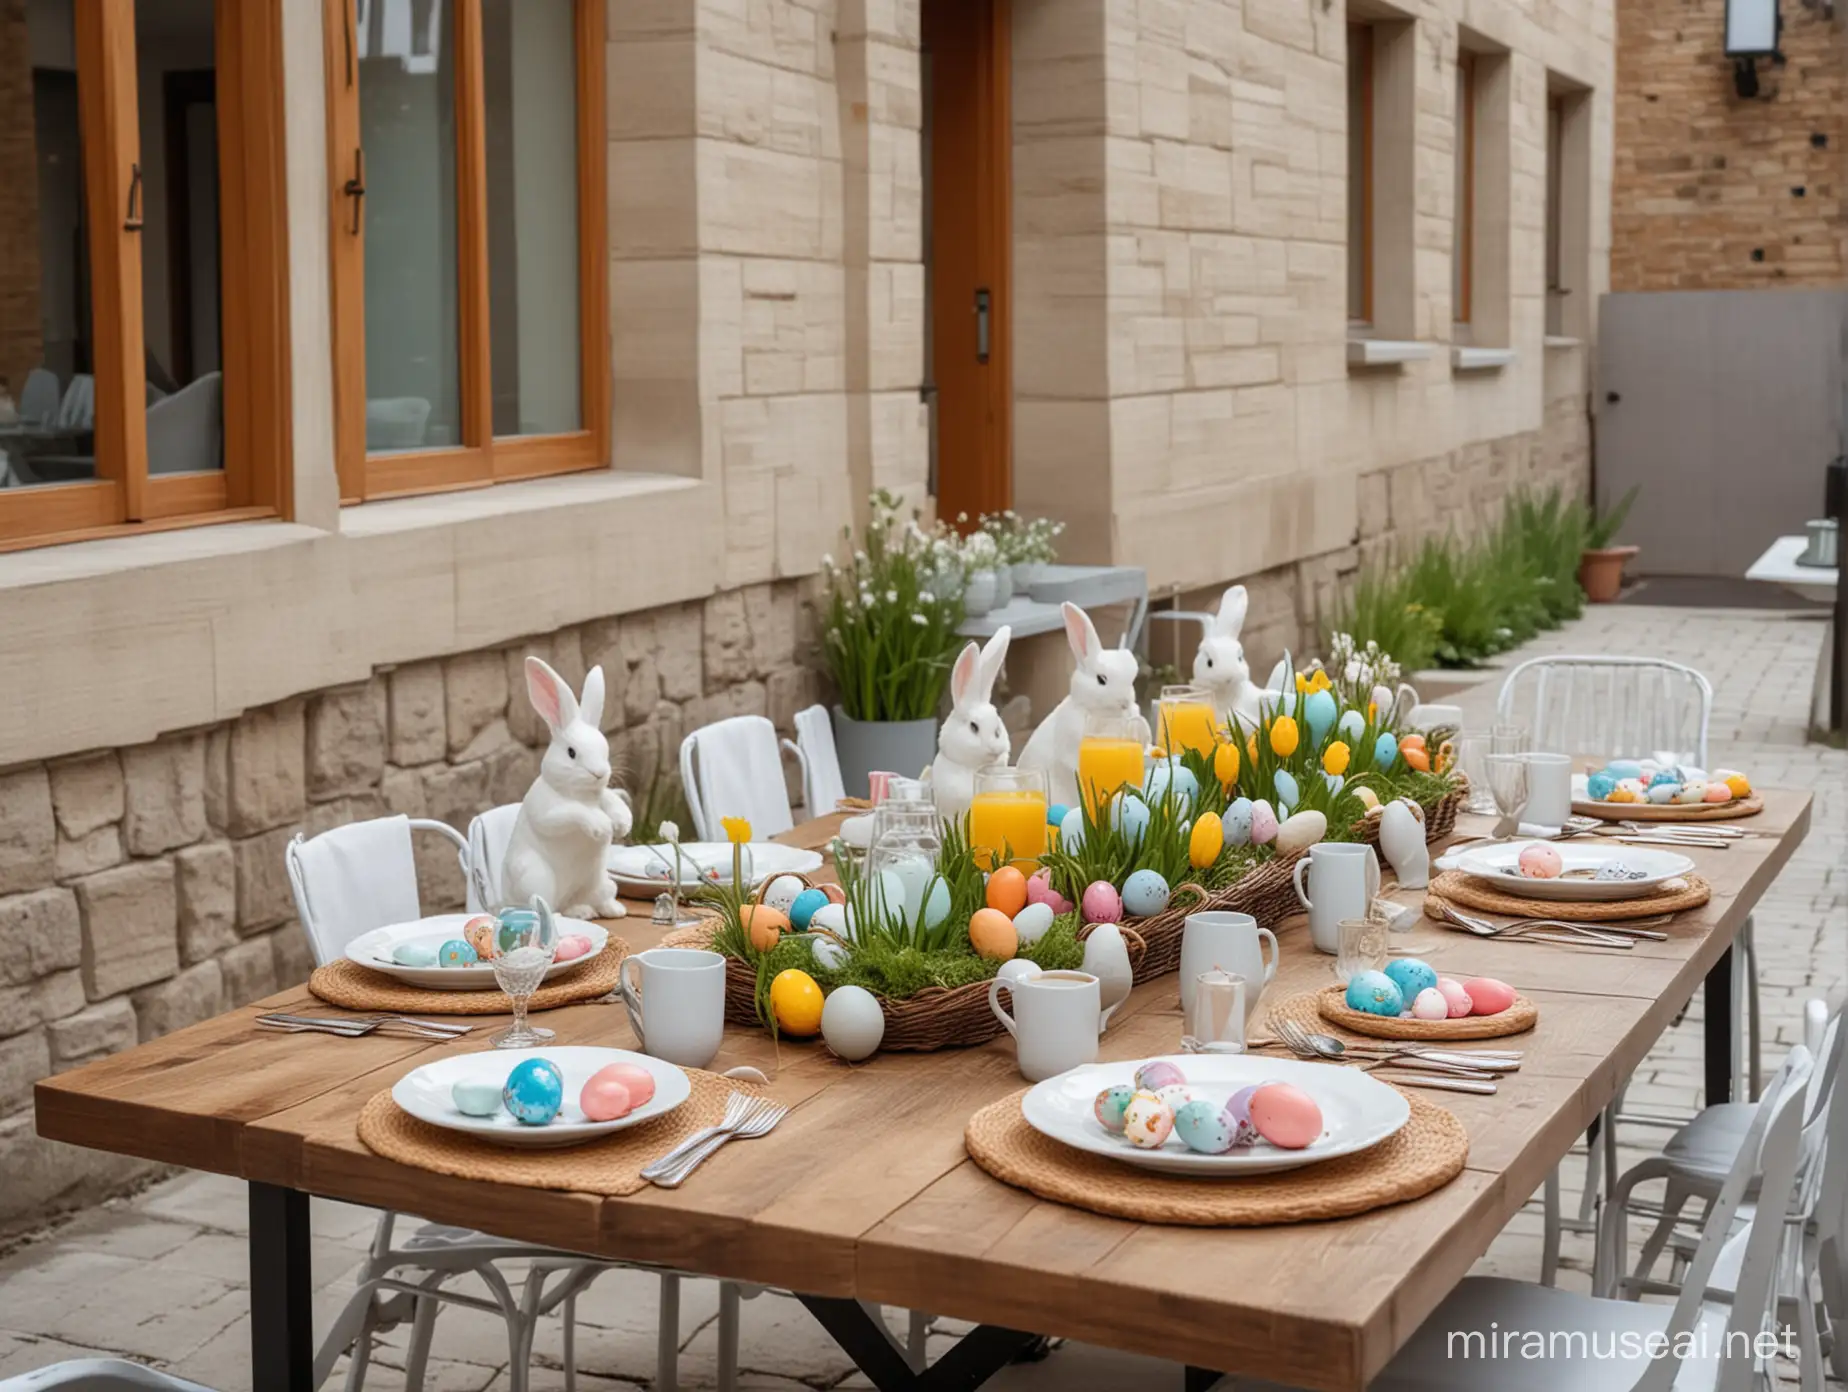 Easter Celebration Table with Bunnies and Eggs in Modern Courtyard